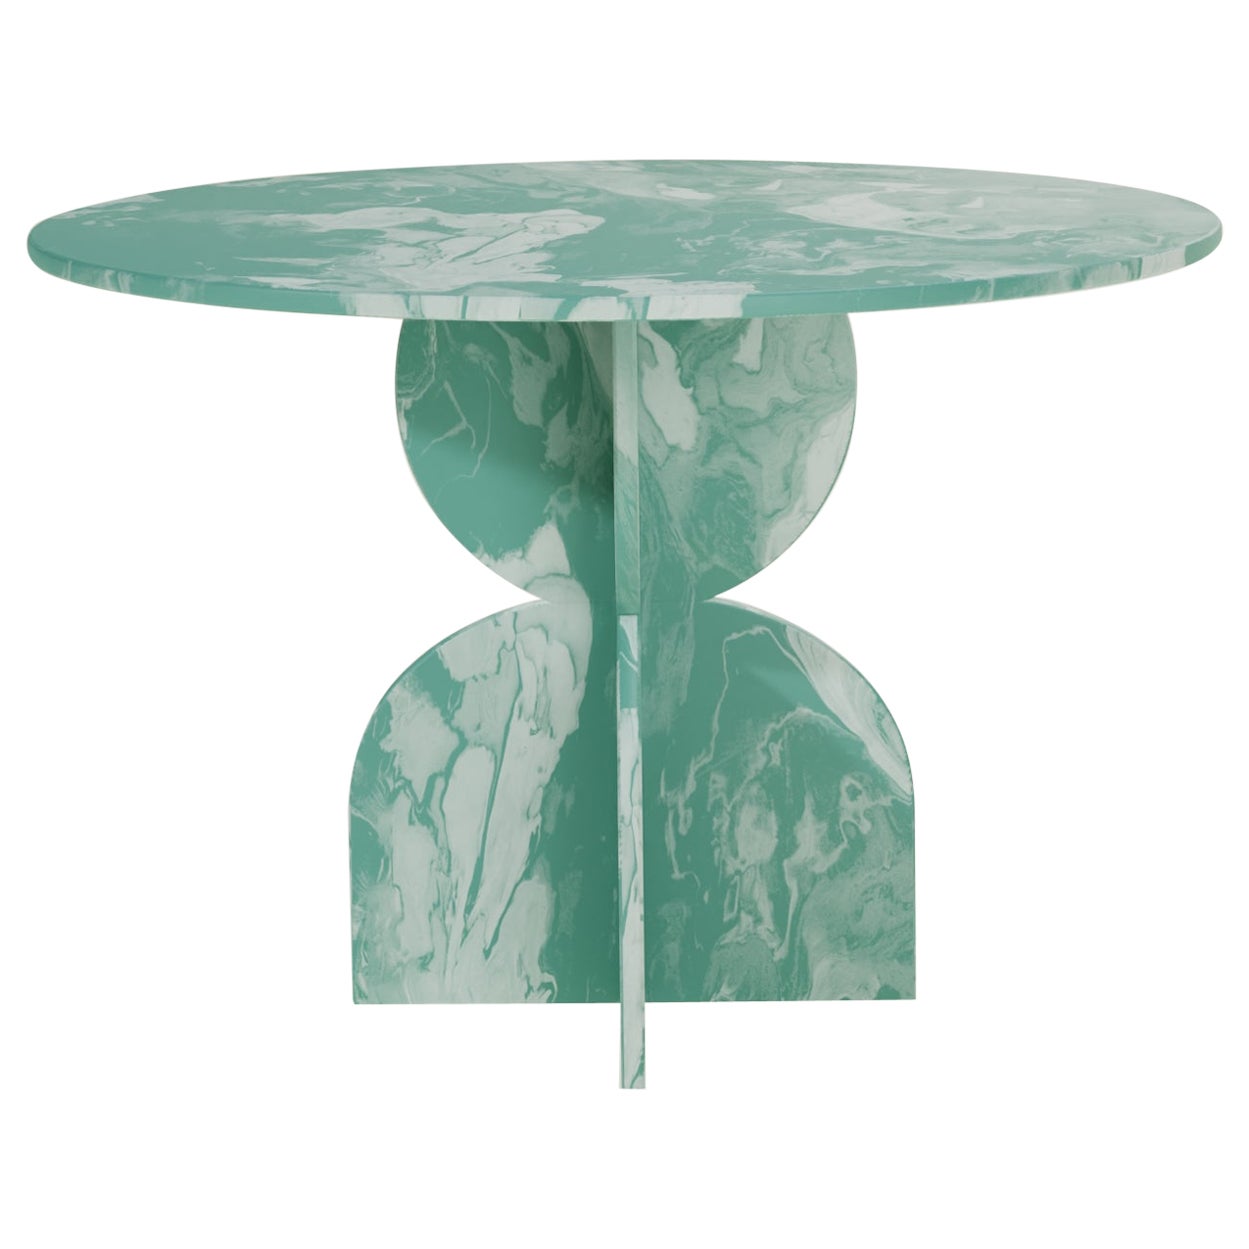 Contemporary Green Round Table Handcrafted 100% Recycled Plastic by Anqa Studios For Sale